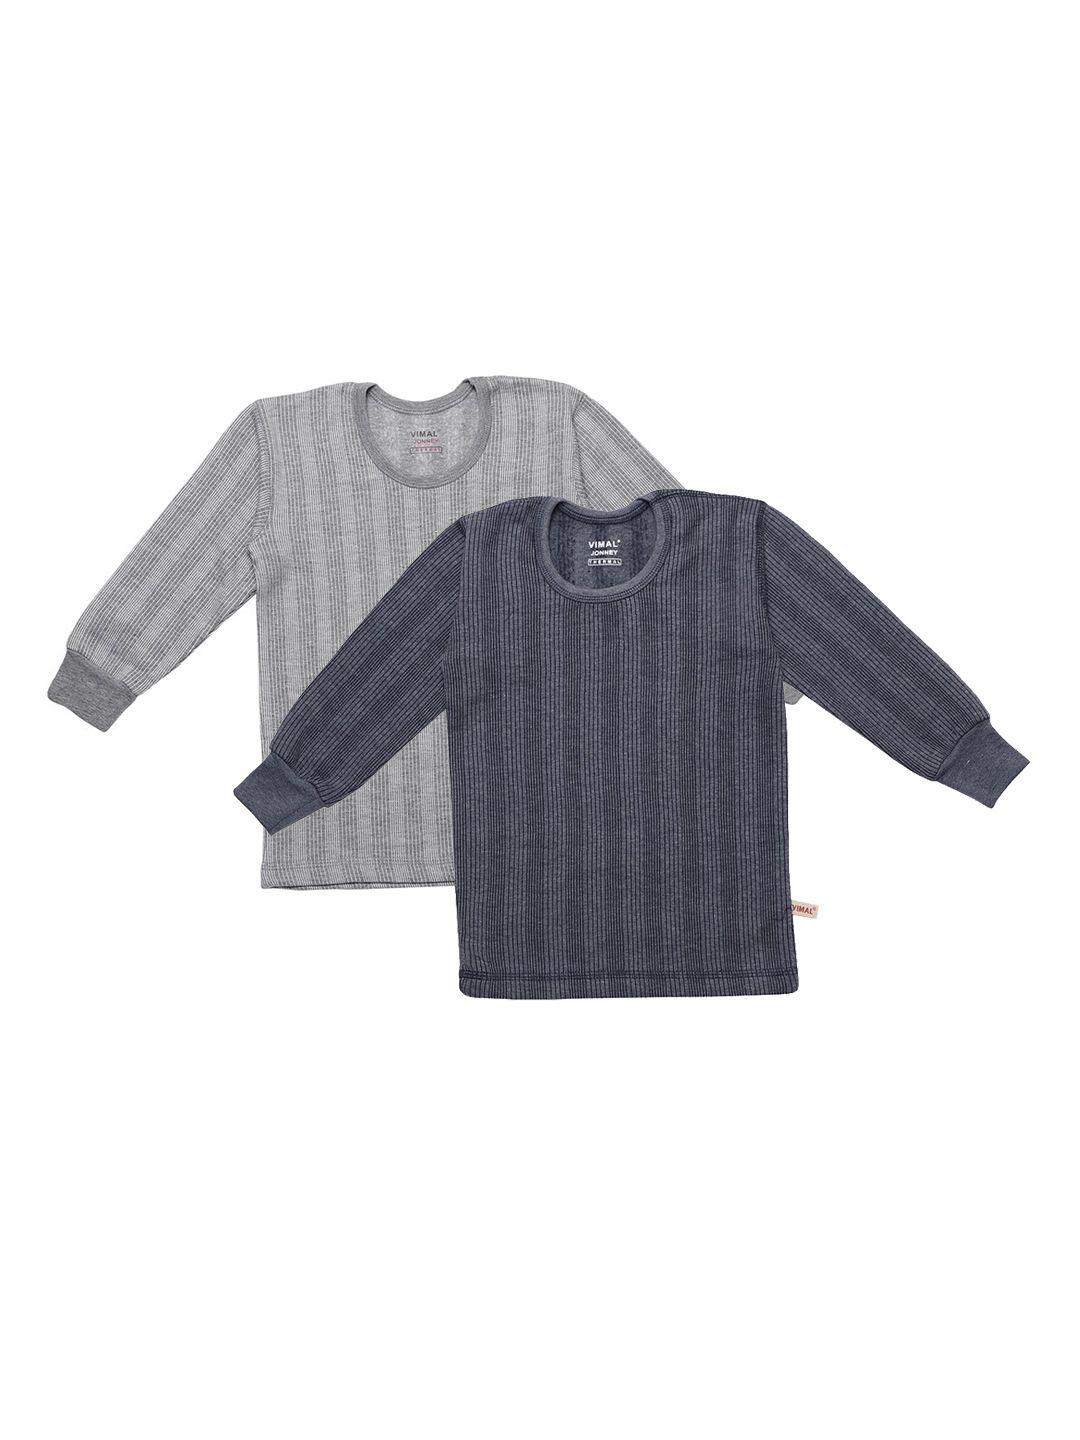 vimal jonney infant kids pack of 2 striped cotton thermal tops